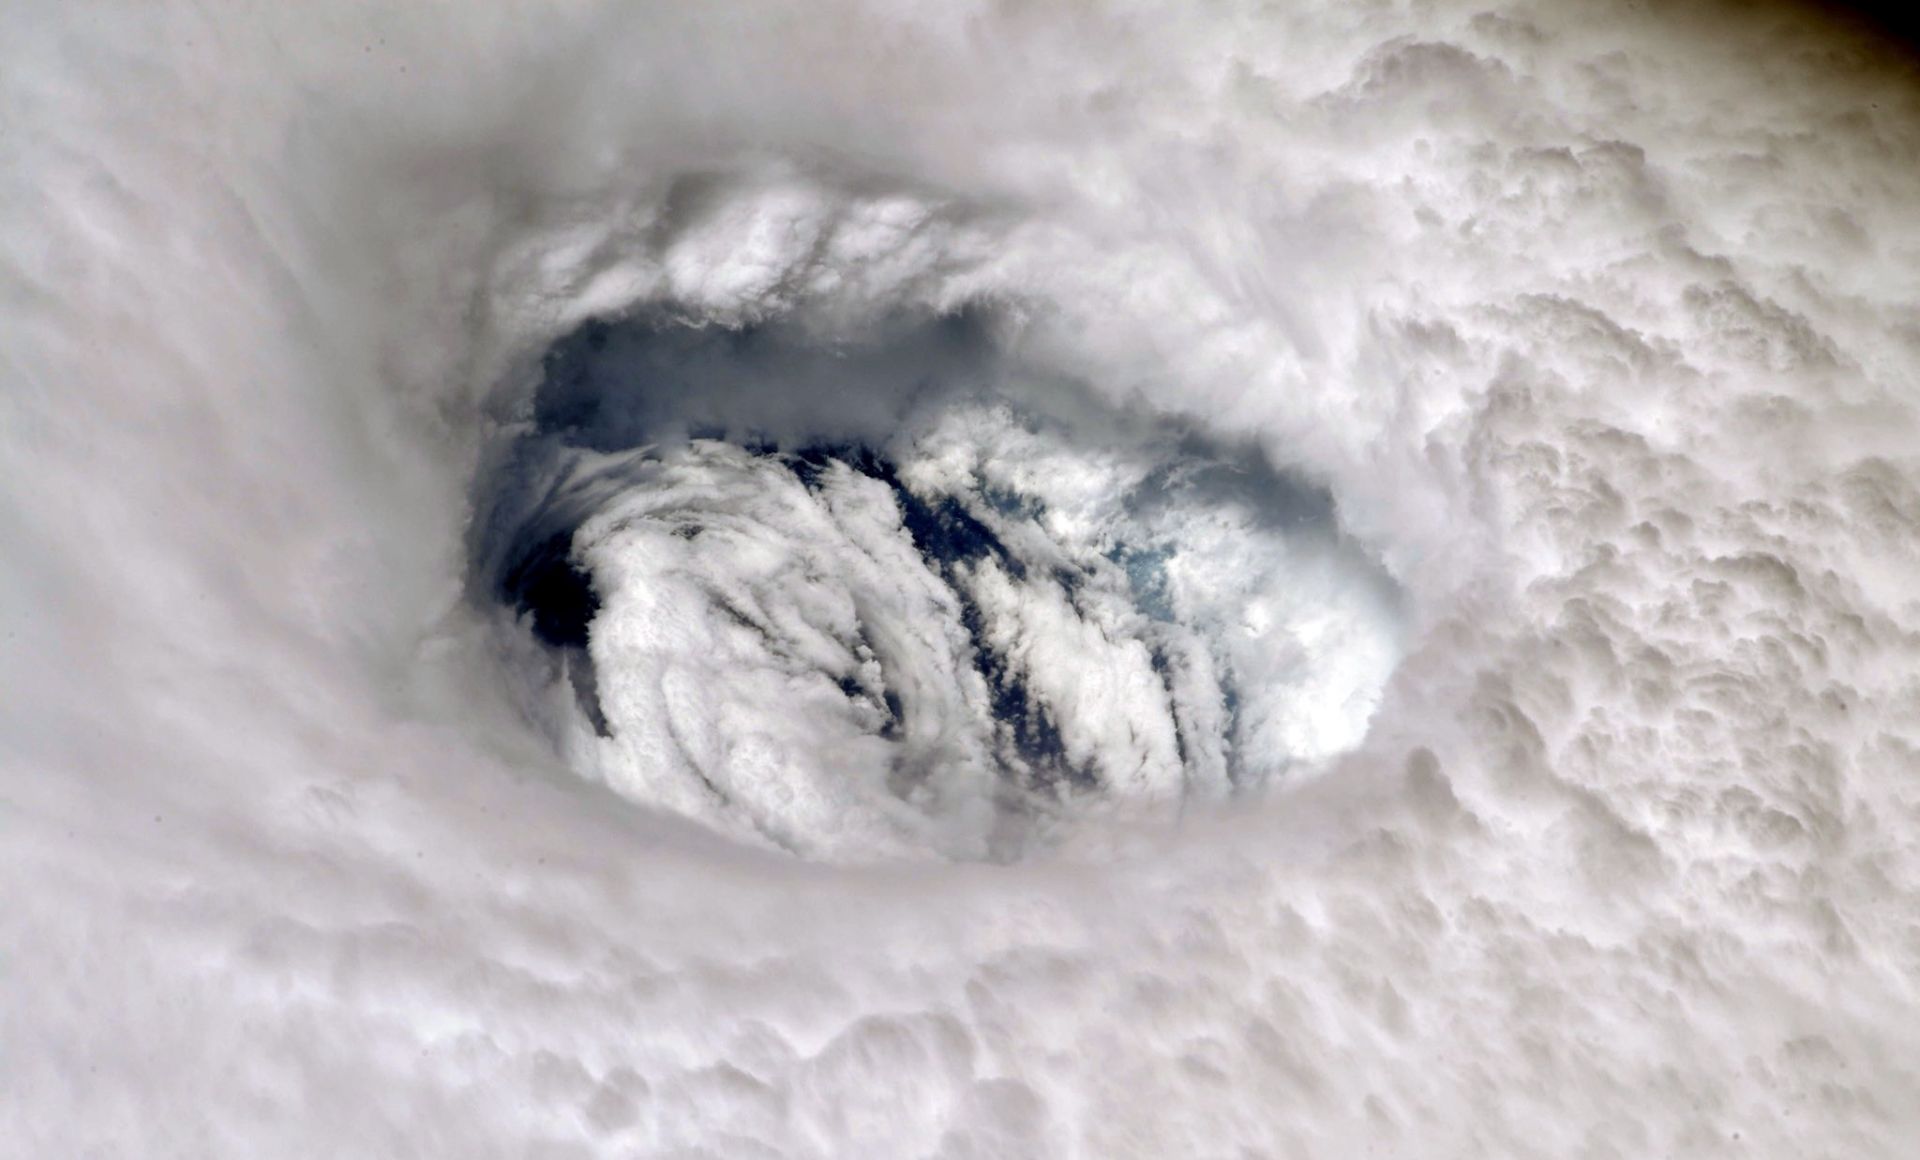 epa07814007 A handout photo made available by NASA shows an image of Hurricane Dorian's eye taken by NASA astronaut Nick Hague, from aboard the International Space Station (ISS), 02 September 2019. The station orbits more than 200 miles above the Earth. Hurricane Dorian, which made landfall on the Bahamas as category 5 and now reclassified as category 4, is expected to continue on its projected path towards the Florida coast in the upcoming days.  EPA/NASA HANDOUT  HANDOUT EDITORIAL USE ONLY/NO SALES